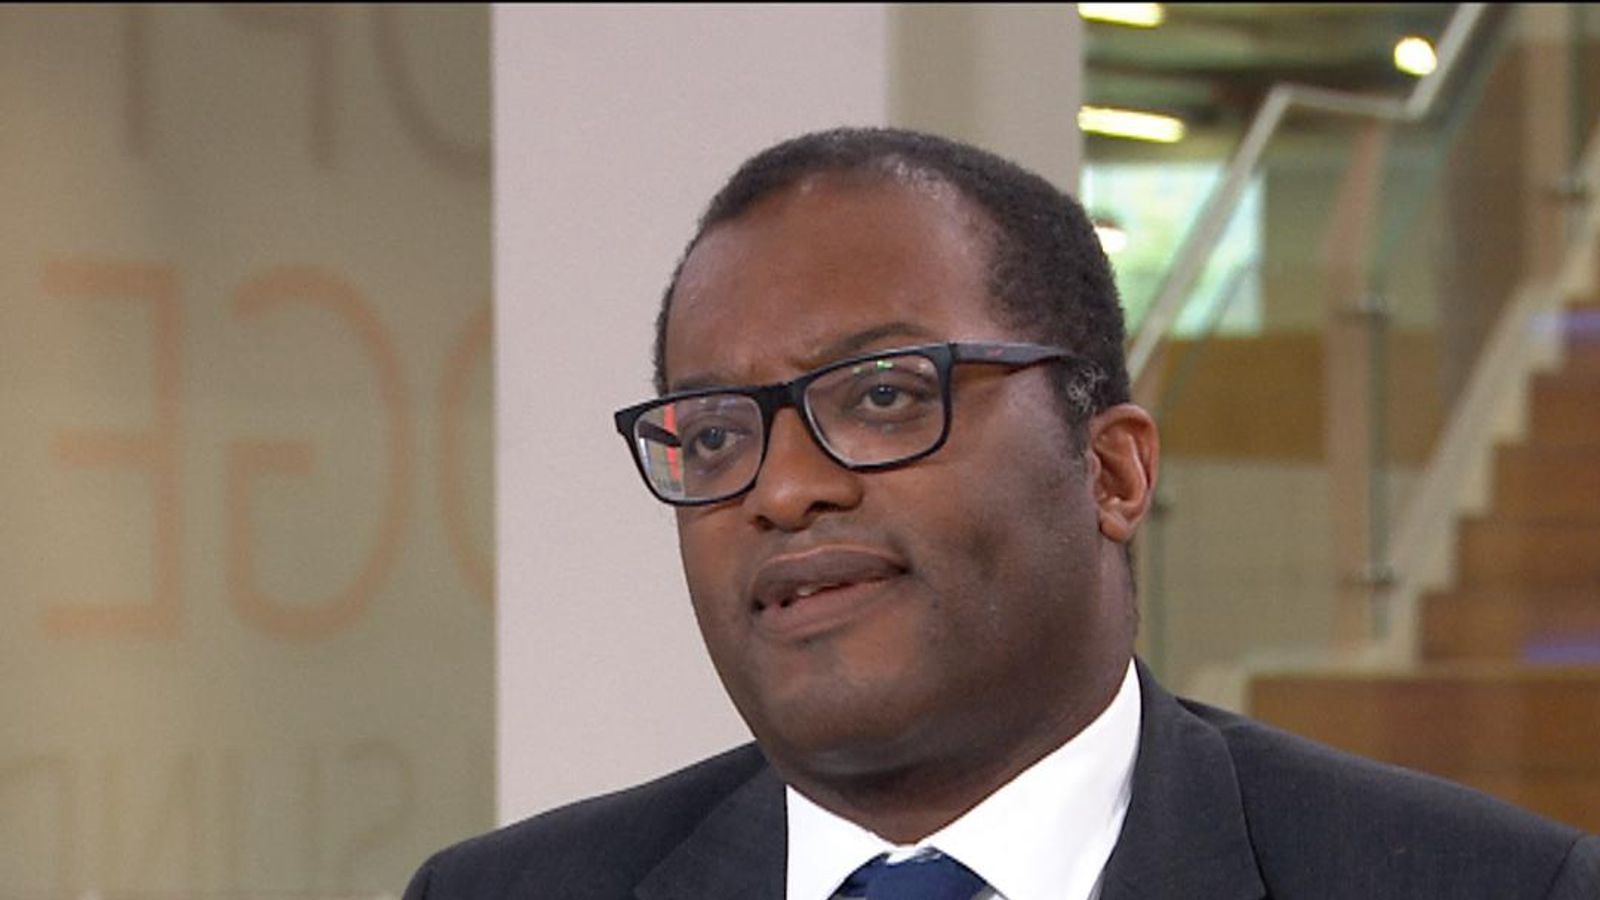 You are currently viewing Ghanaian-British Kwasi Kwarteng becomes UK’s first black Finance Minister | The African Exponent.